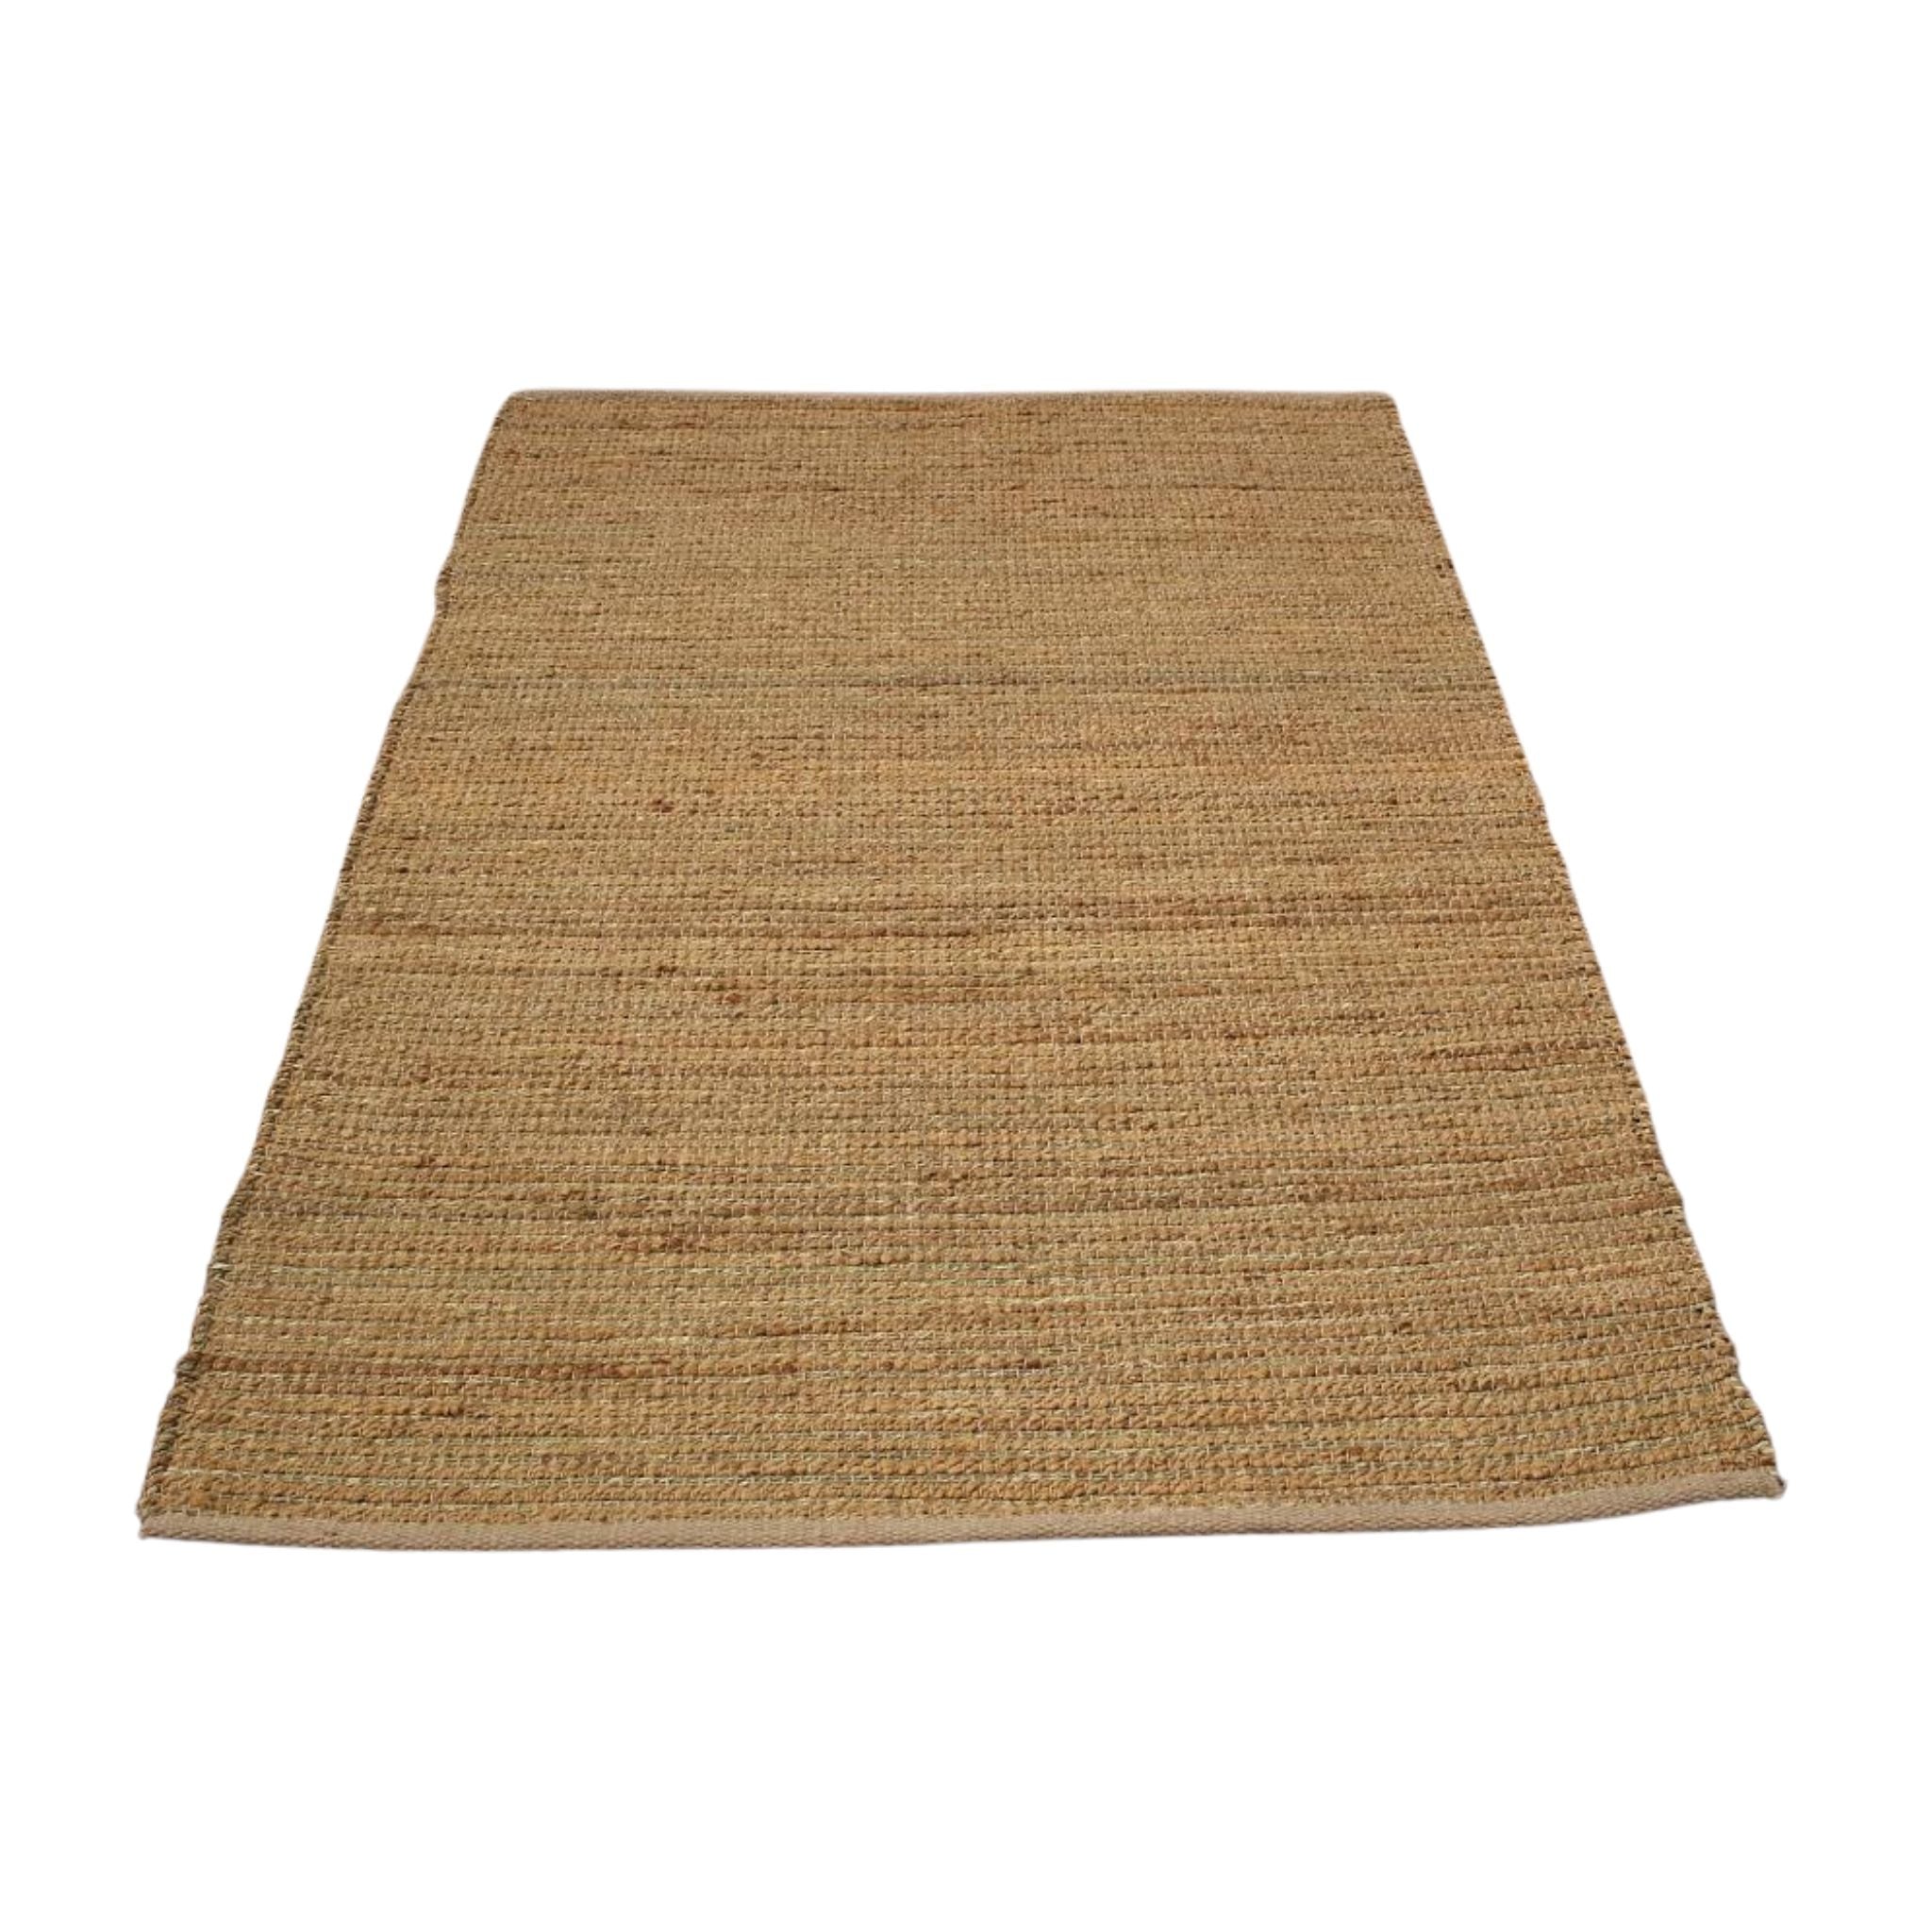 Natural Stripes Rug product image on white background